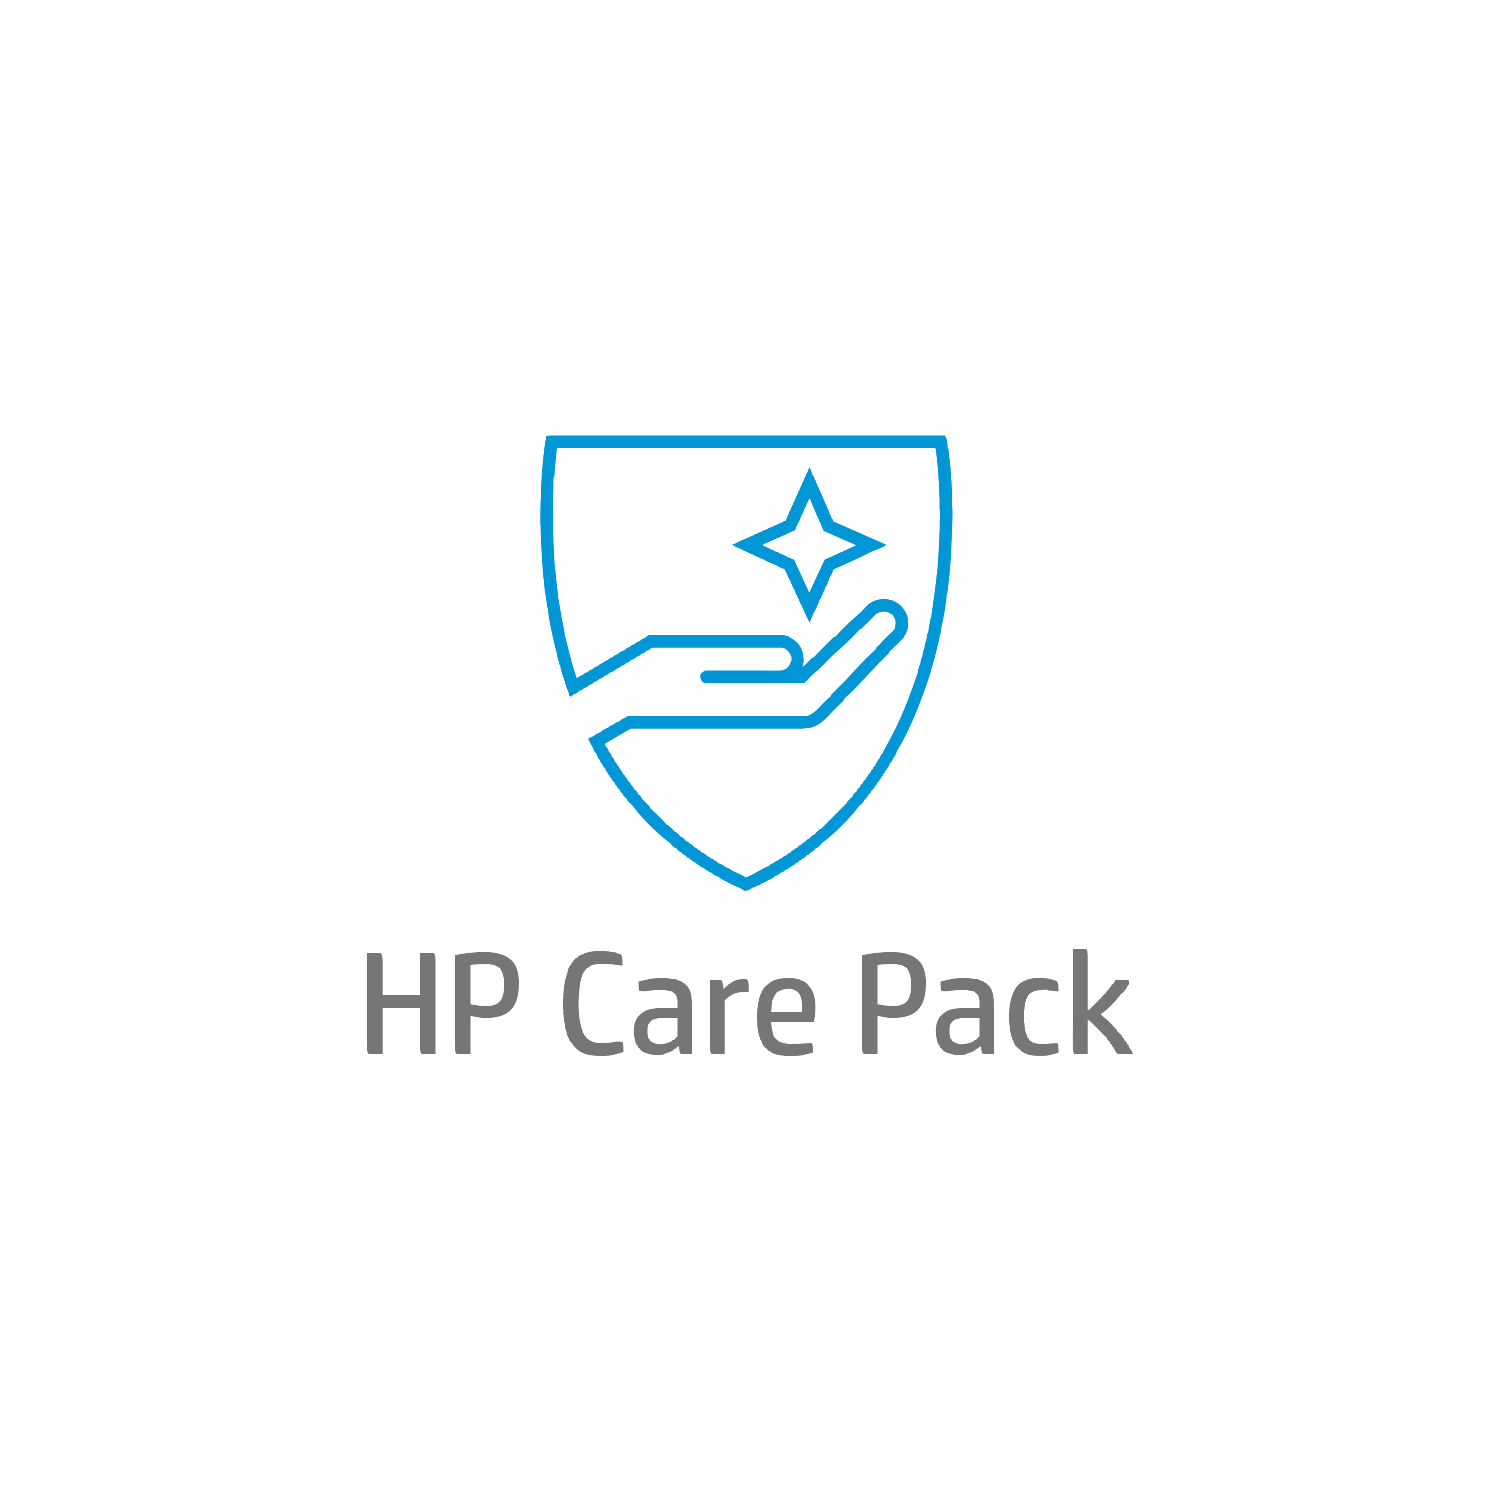 HP Support Solution Active Care 5 ans pour stat trav - Interv JOS sur site/Conserv supports défect